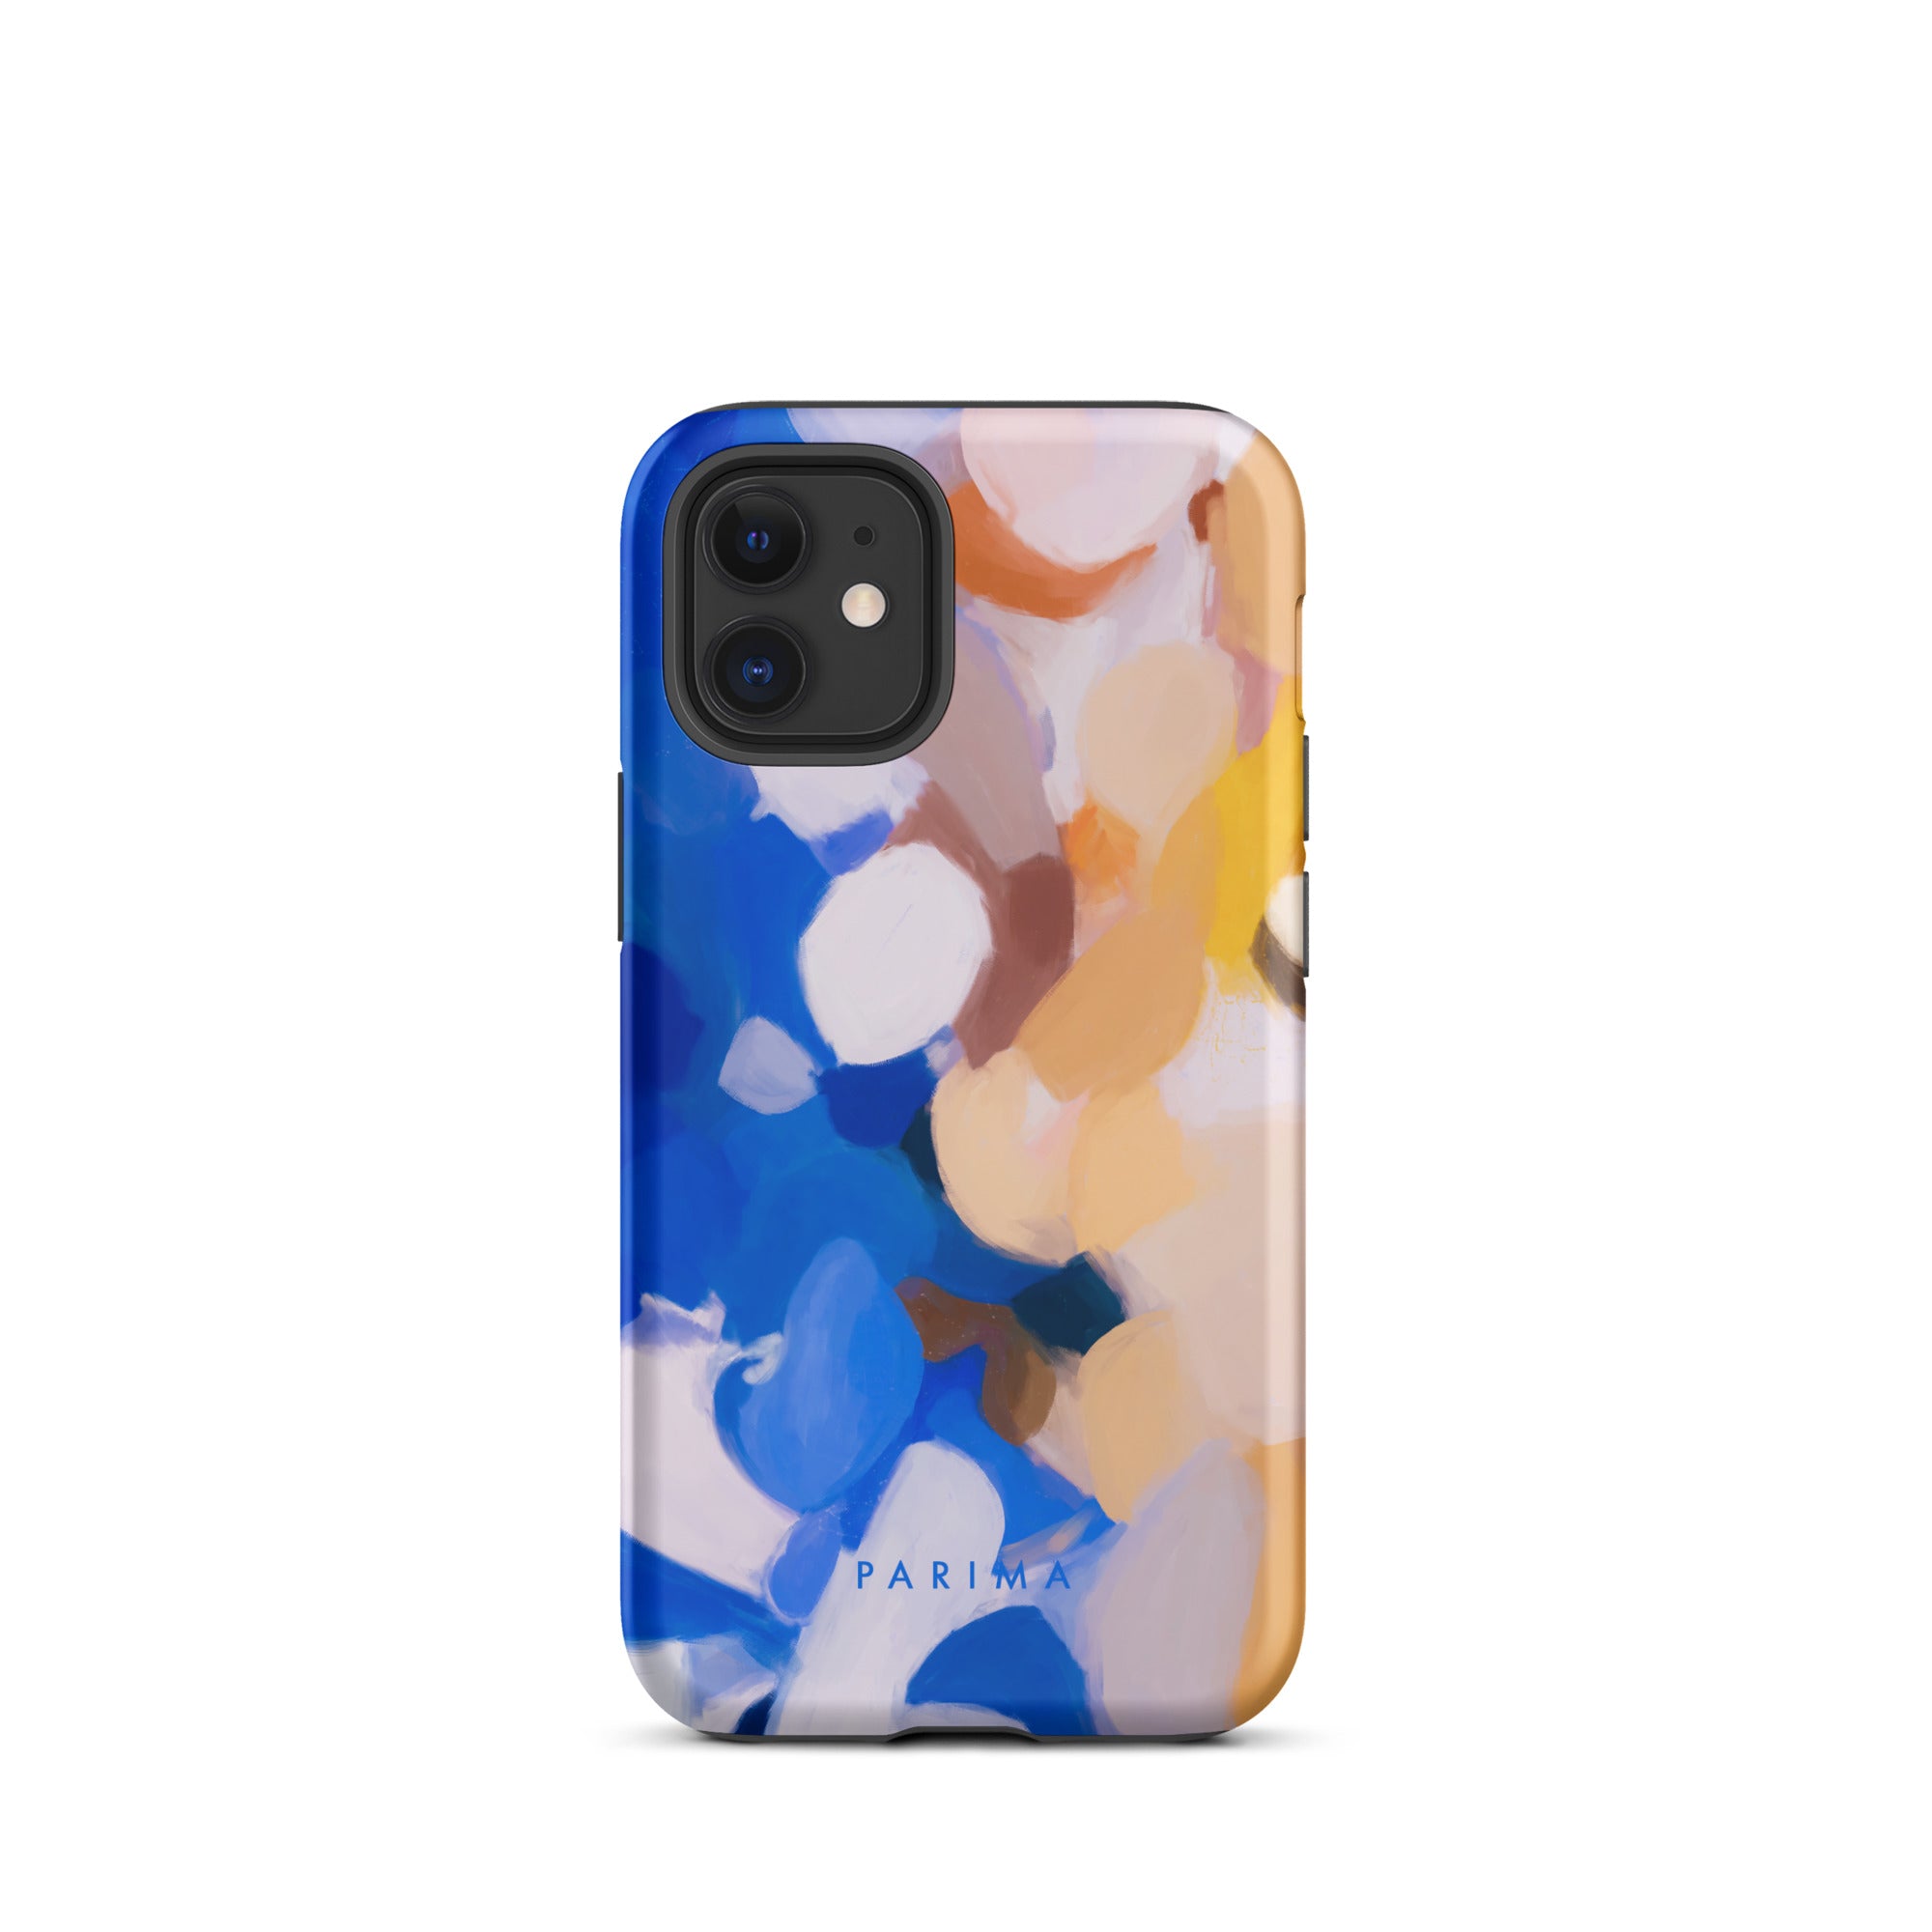 Bluebell, blue and yellow abstract art - iPhone 12 Mini tough case by Parima Studio